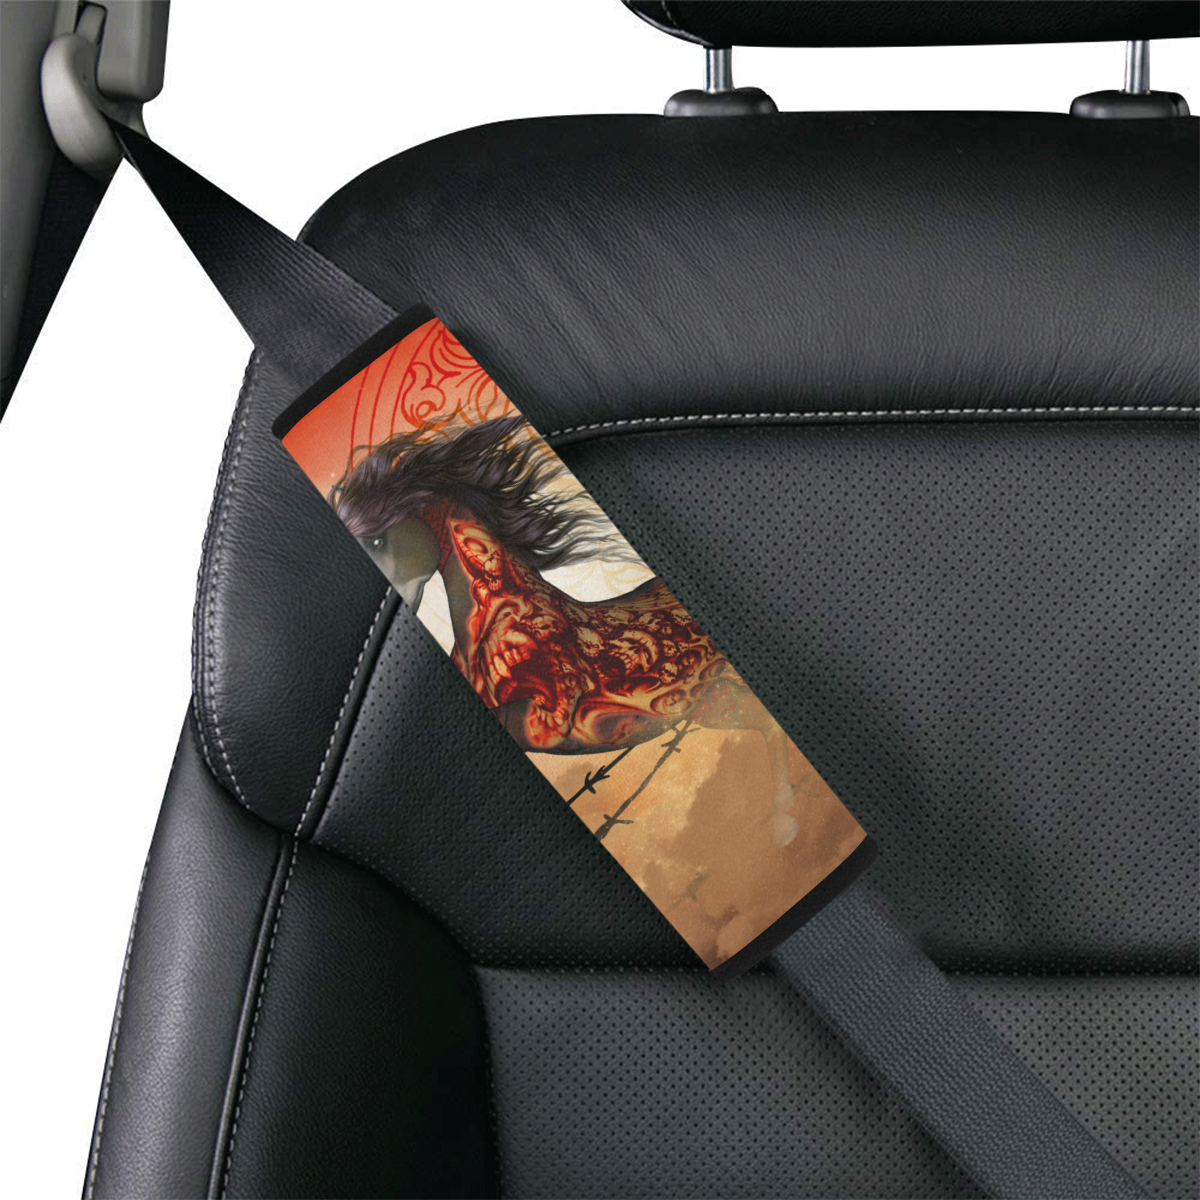 Awesome creepy horse with skulls Car Seat Belt Cover 7''x8.5''